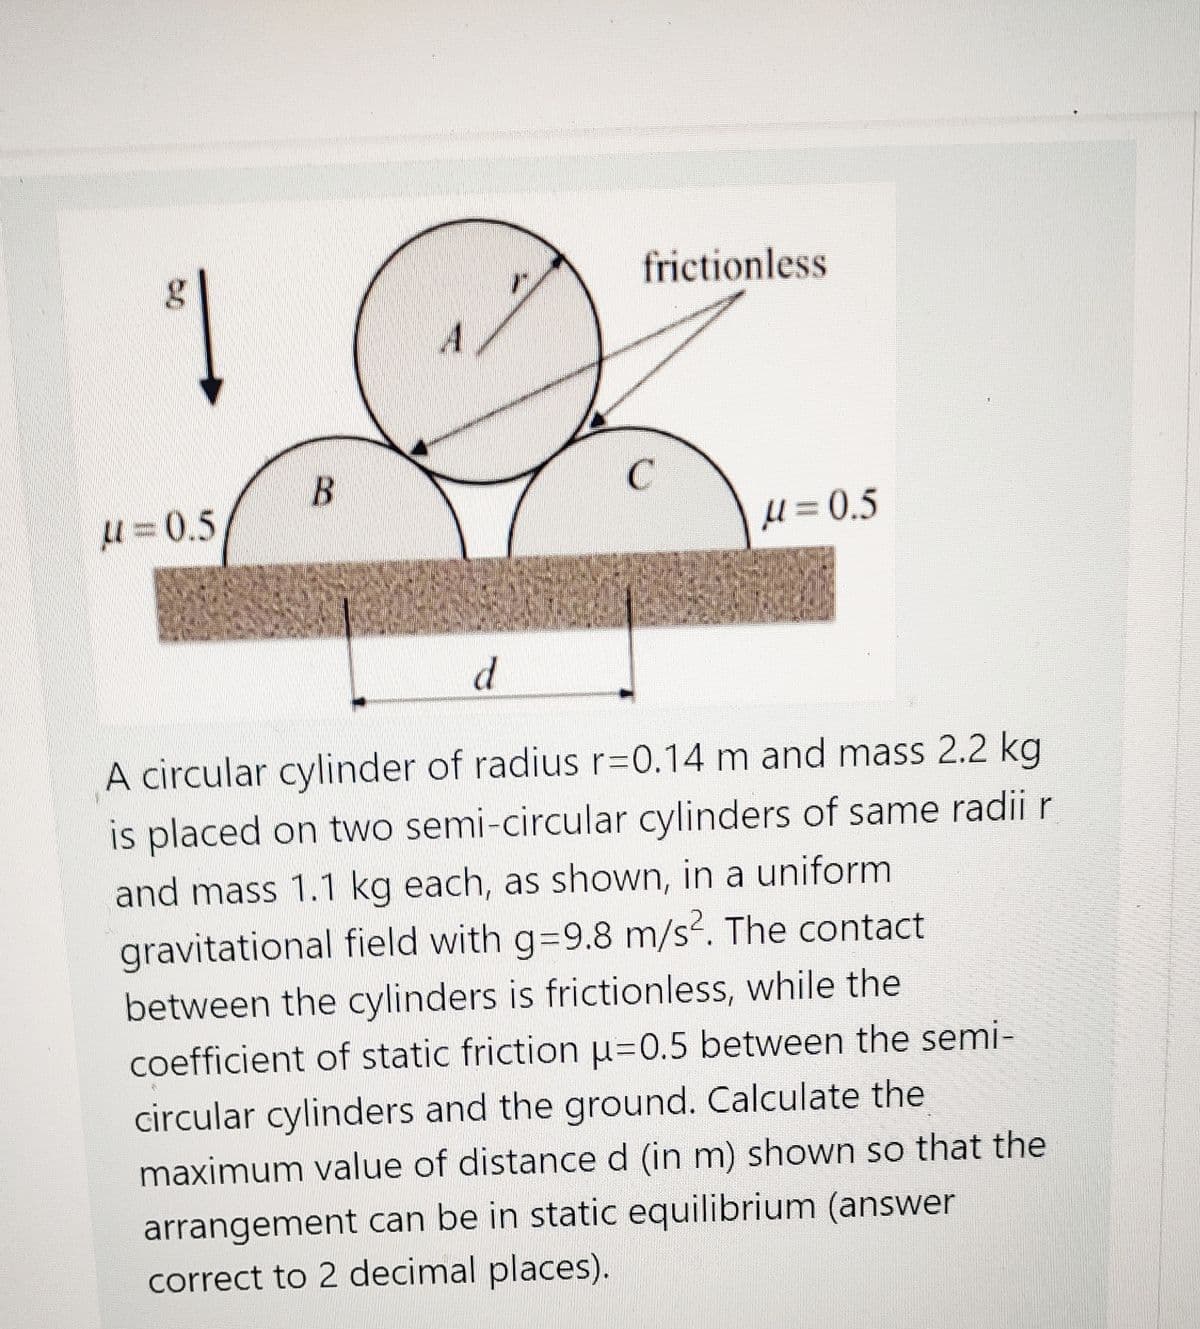 frictionless
A
B
从= 0.5
U = 0.5
d
A circular cylinder of radius r=0.14 m and mass 2.2 kg
is placed on two semi-circular cylinders of same radii r
and mass 1.1 kg each, as shown, in a uniform
gravitational field with g=9.8 m/s. The contact
between the cylinders is frictionless, while the
coefficient of static friction u=0.5 between the semi-
circular cylinders and the ground. Calculate the
maximum value of distanced (in m) shown so that the
arrangement can be in static equilibrium (answer
correct to 2 decimal places).
